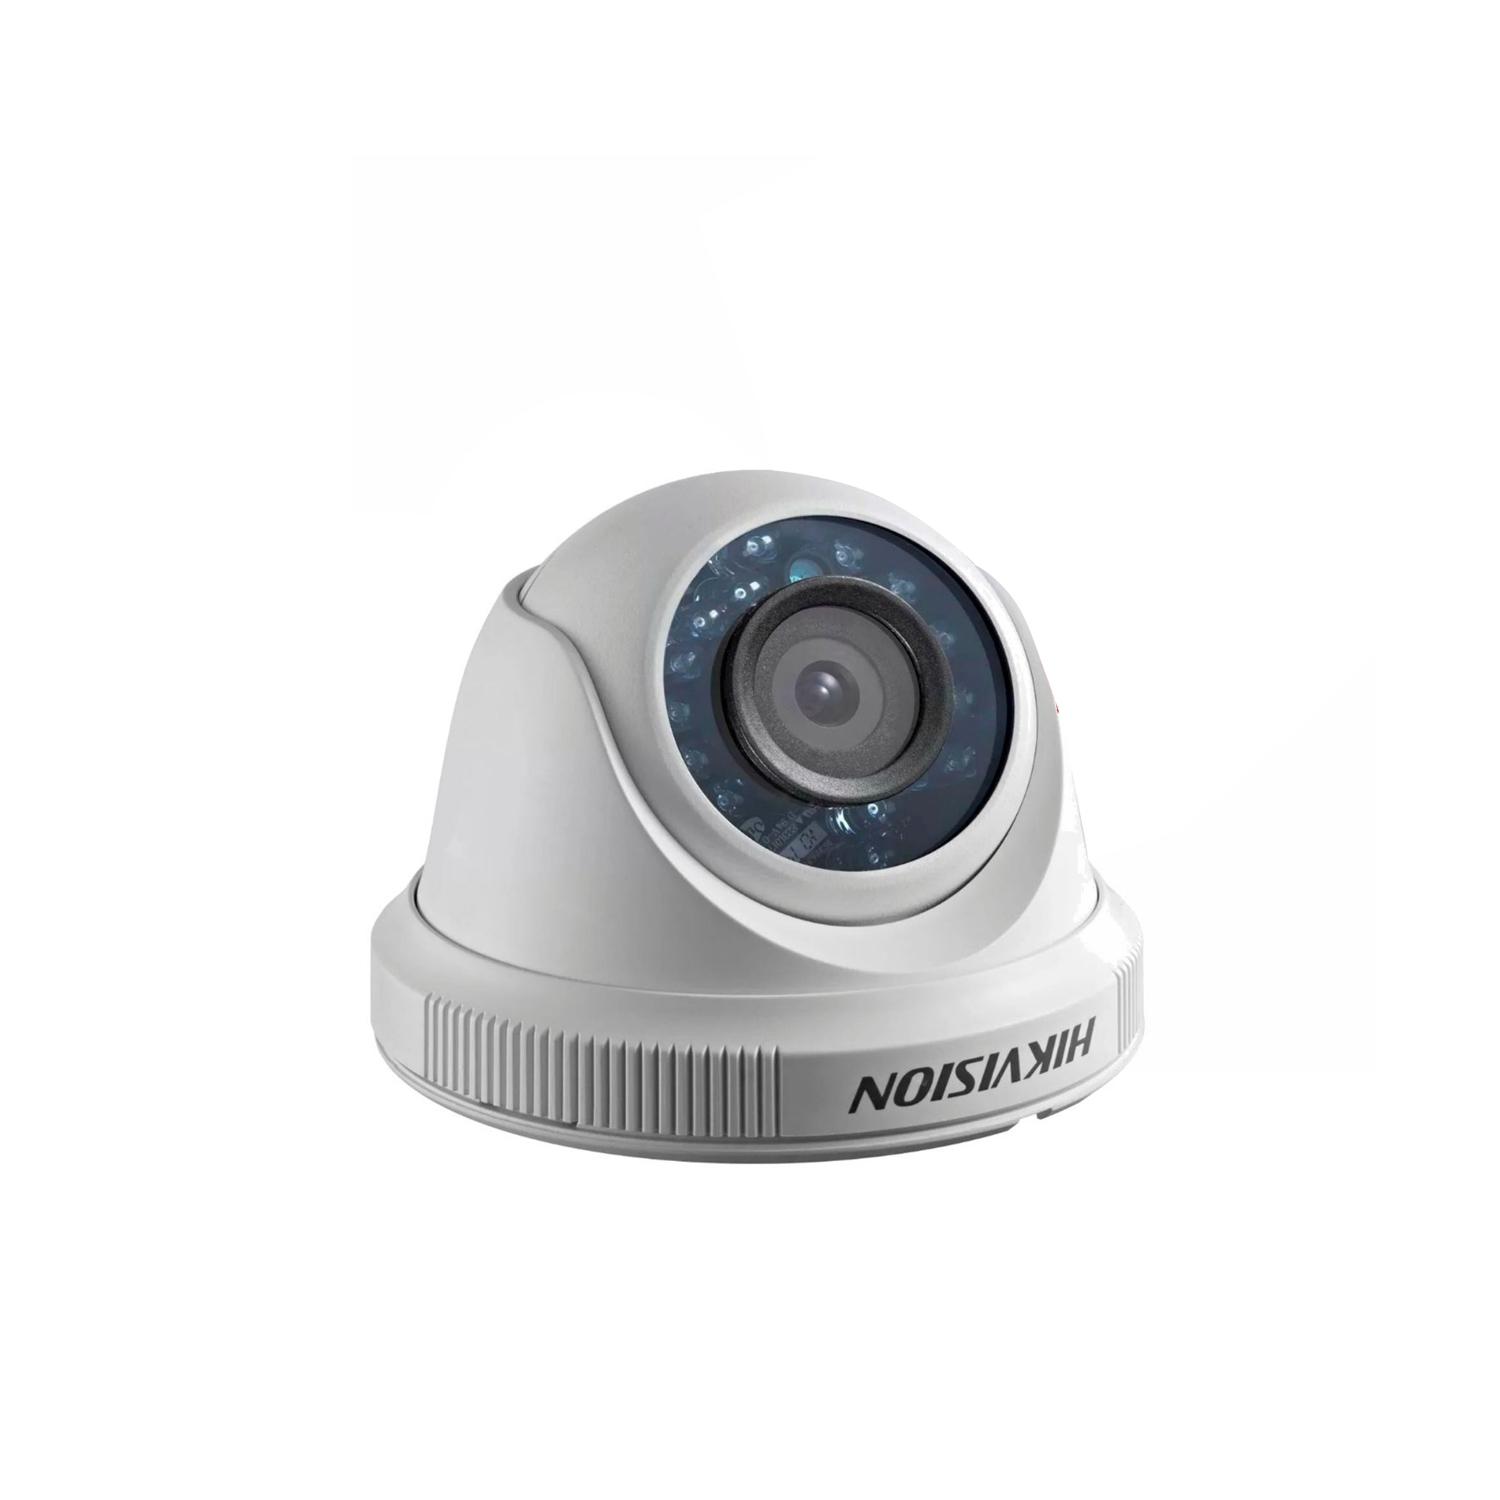 AHD KAMERA IR DOME 2MP 2.8MM 4IN1 1080P HIKVISION DS-2CE56D0T-IRPF